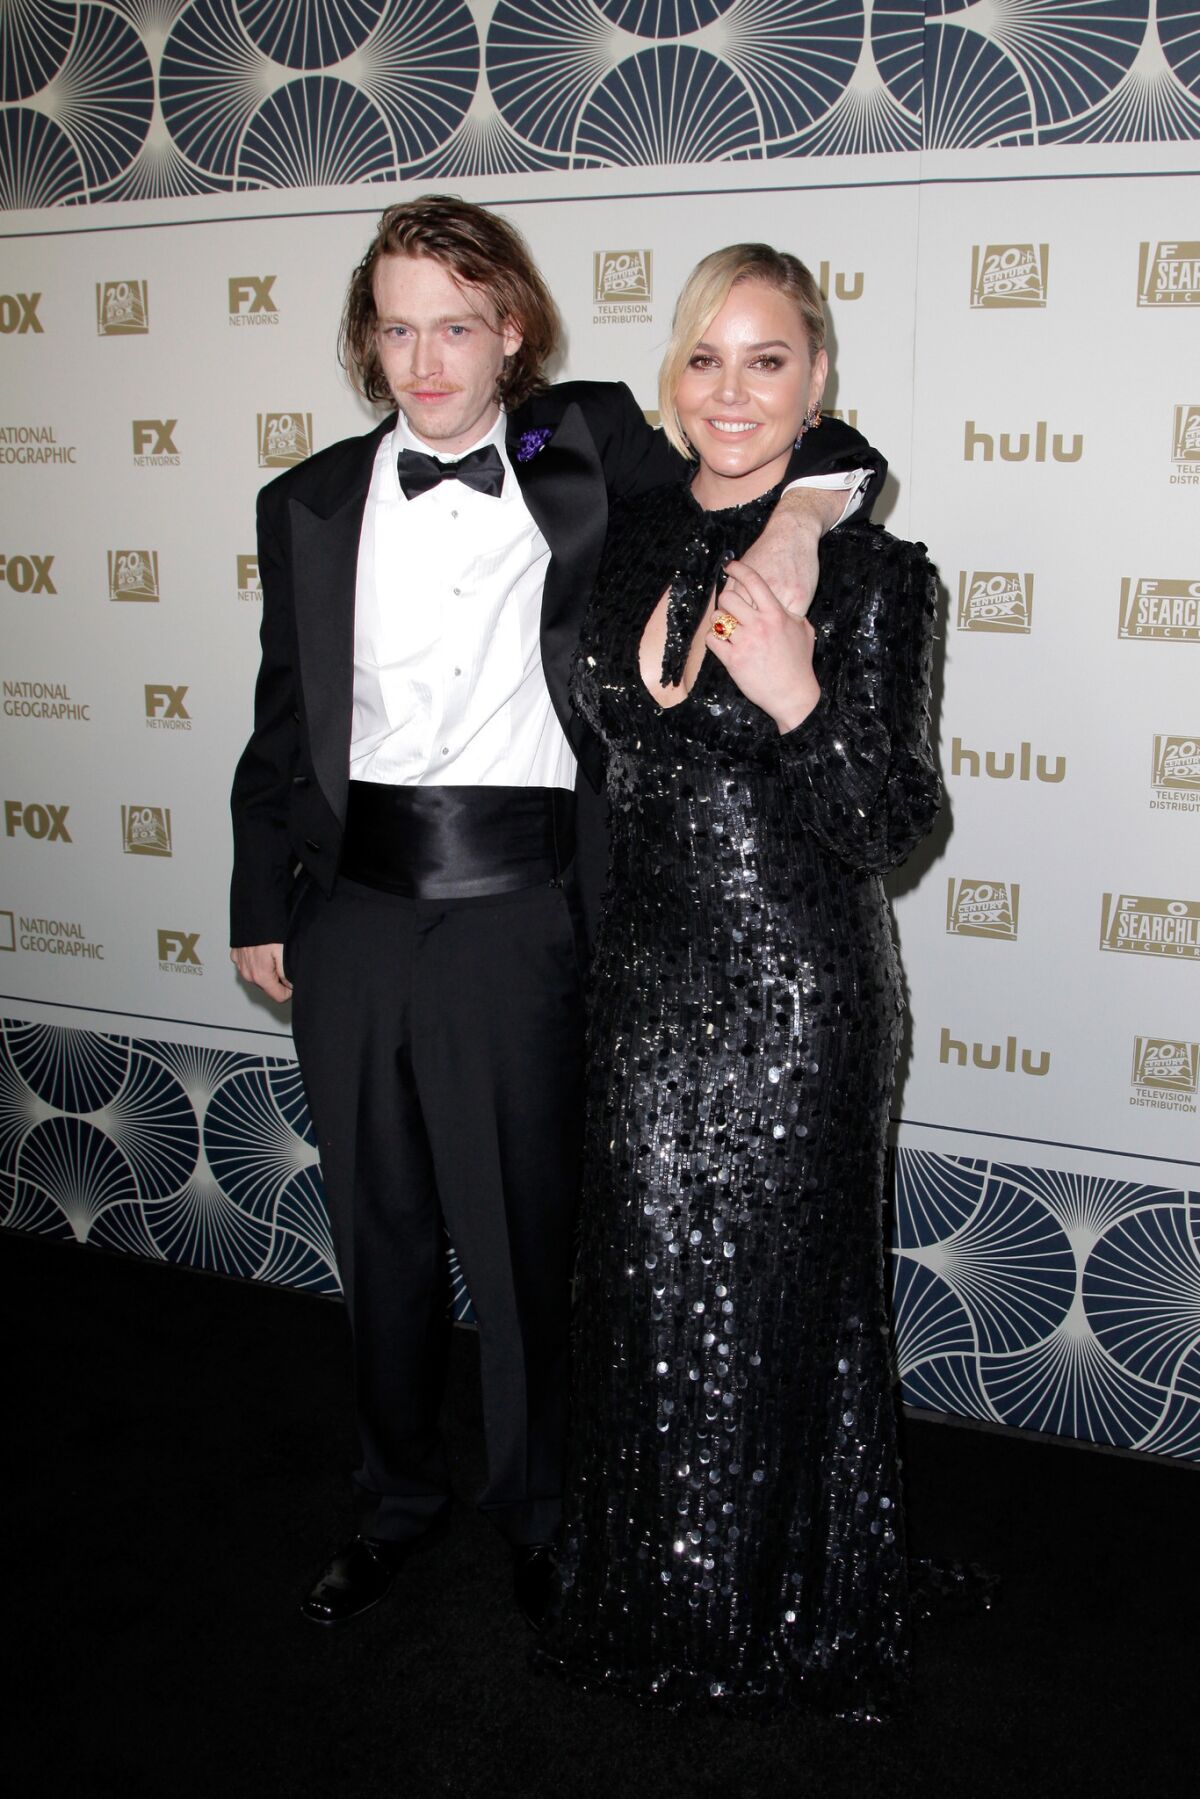 Actors Caleb Landry Jones, left, and Abbie Cornish at the 2018 FOX, FX and Hulu Golden Globes after party at the Beverly Hilton Hotel ()